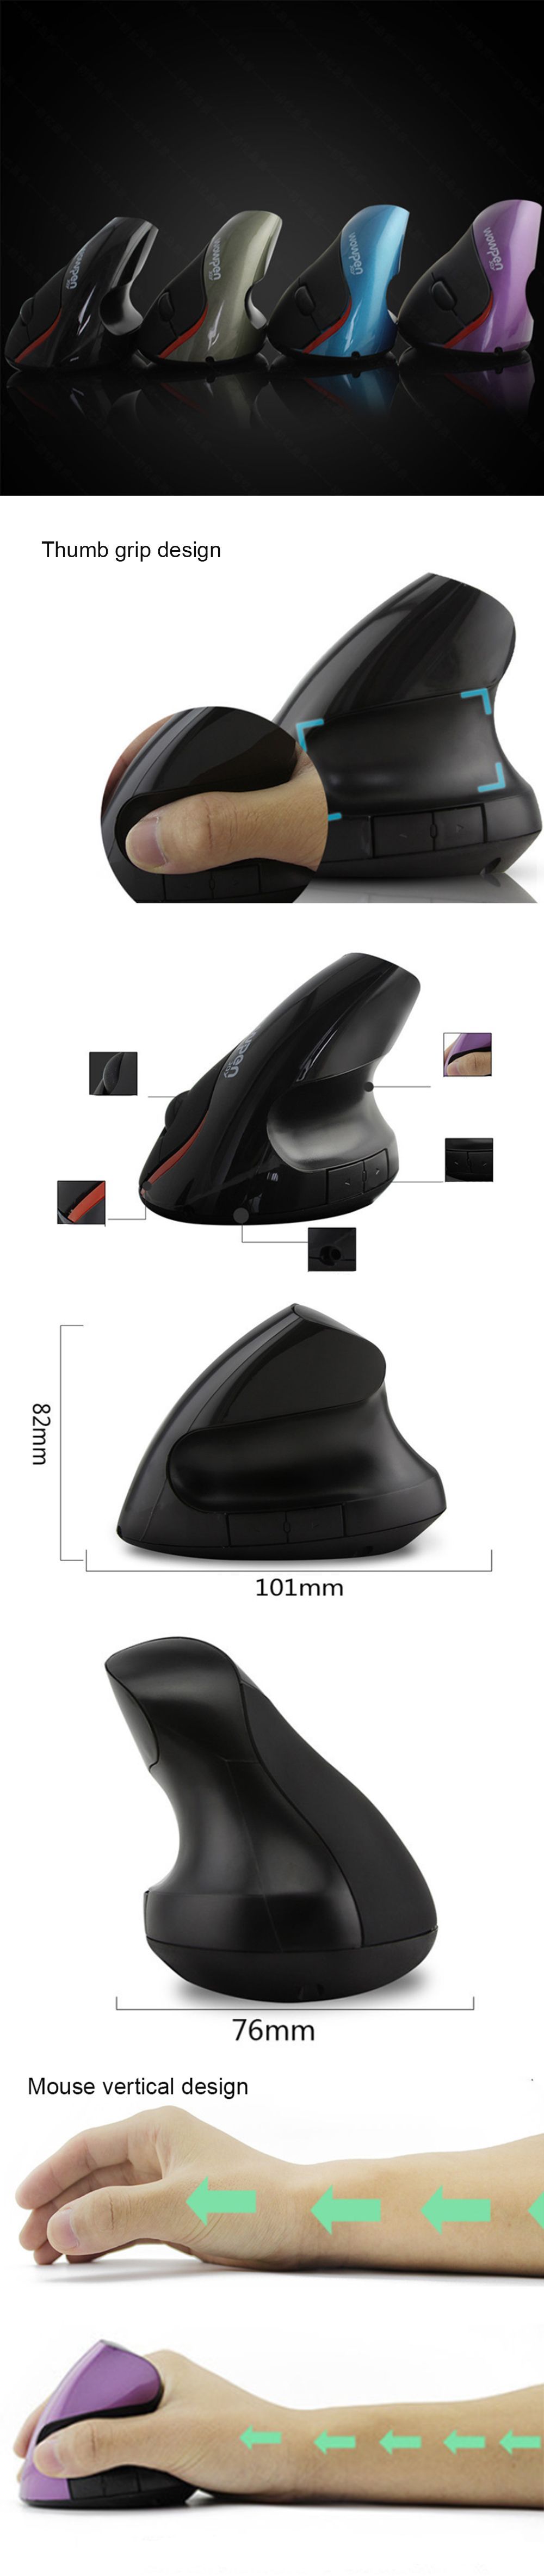 Wowpen-CM0002-Rechargeable-24GHz-1200DPI-Wireless-Vertical-Mouse-Gaming-Mouse-Ergonomic-Design-1588725